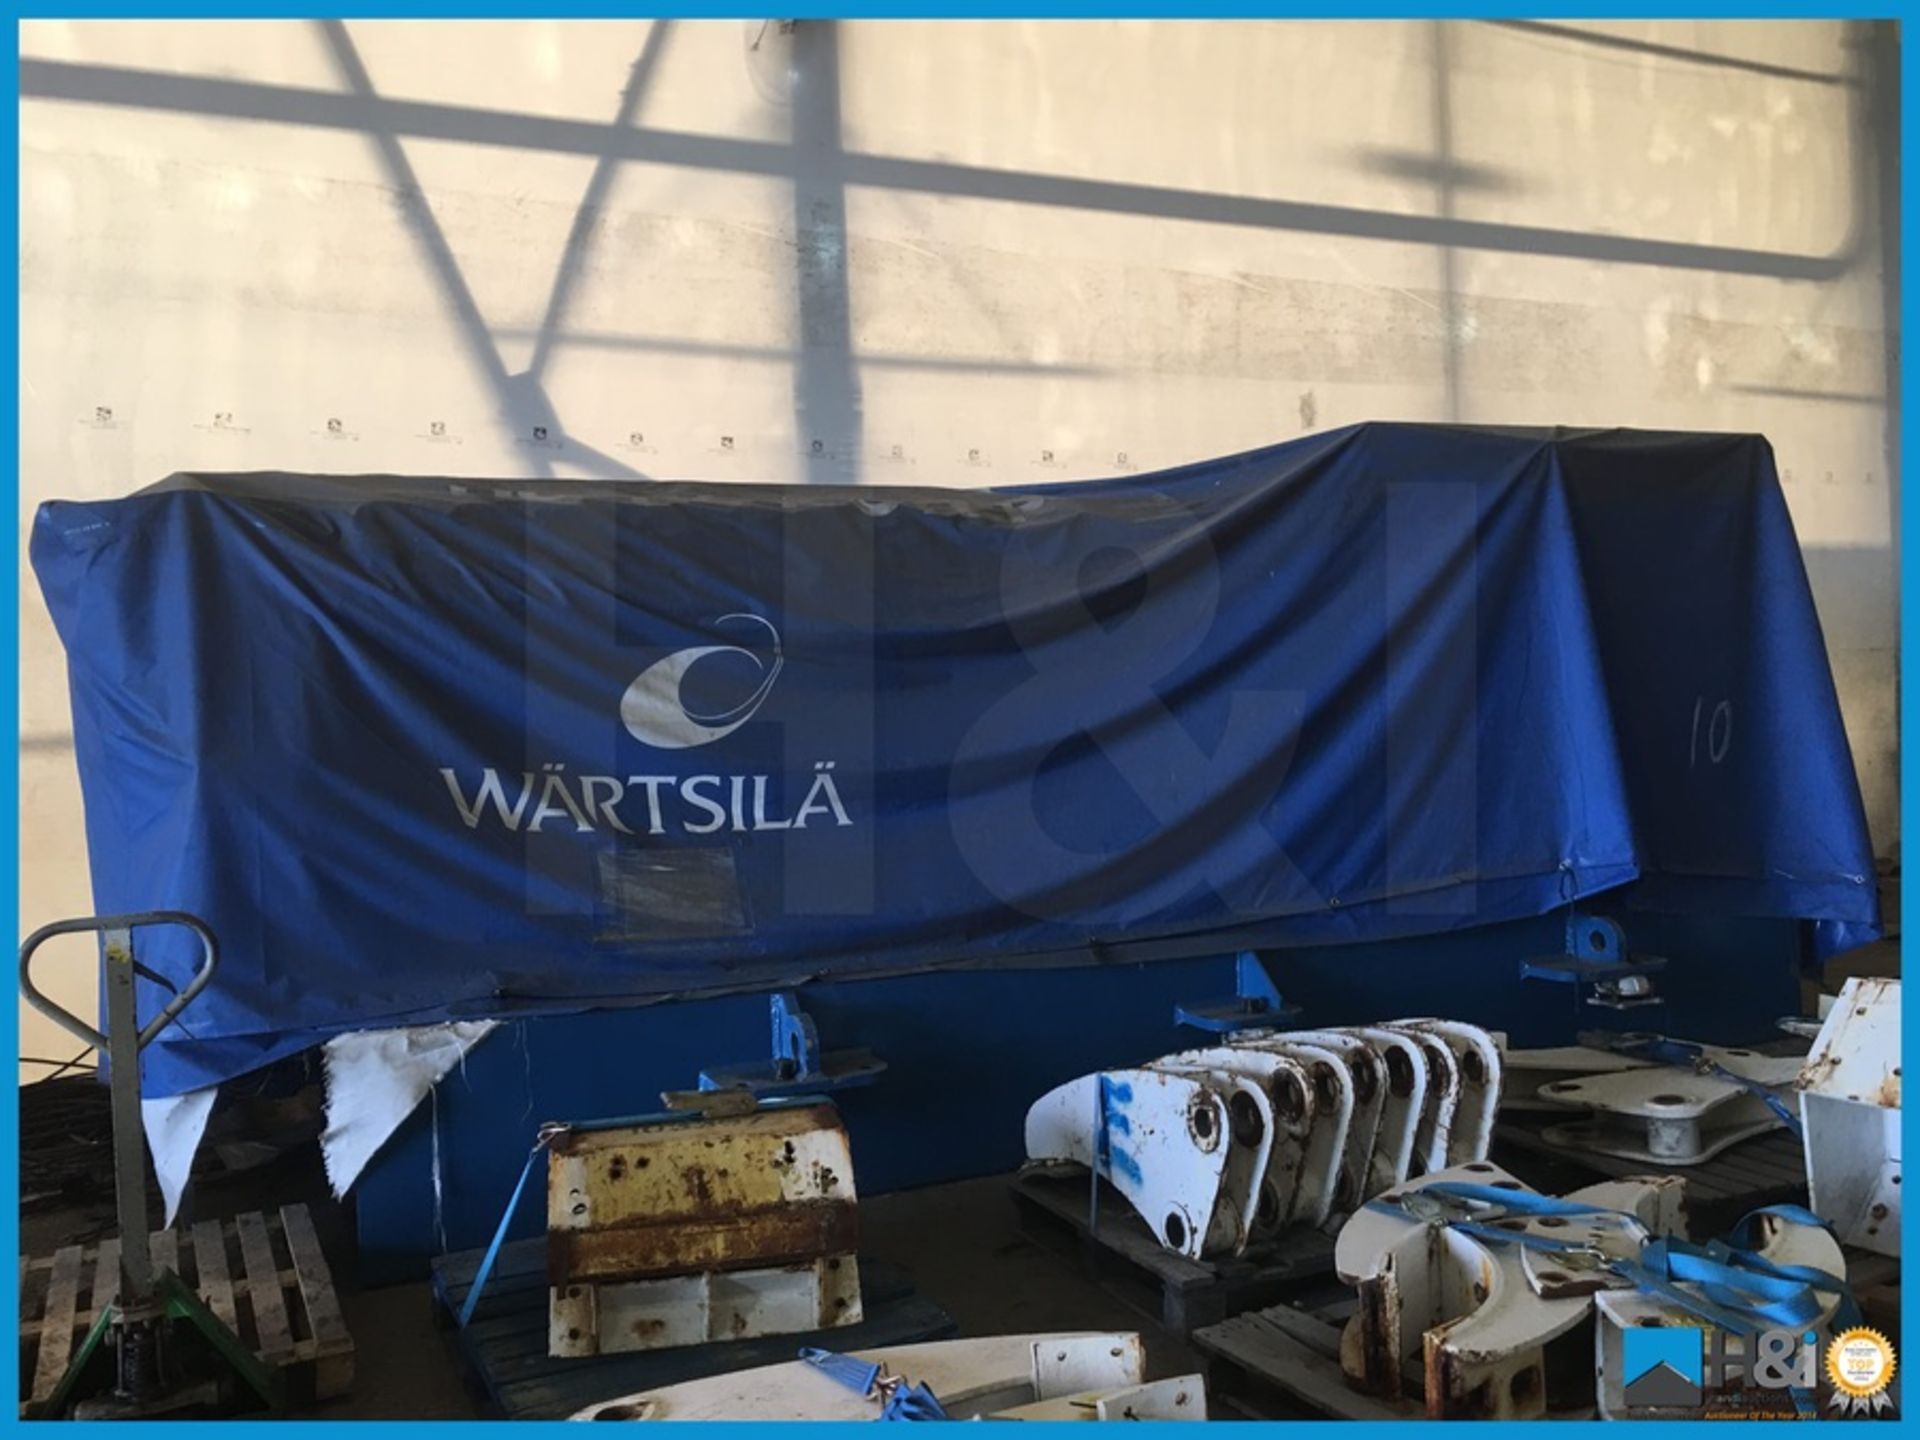 Unused Wartsila 6L20 high capacity diesel generator manufactured in 2013 for a large marine - Image 22 of 22